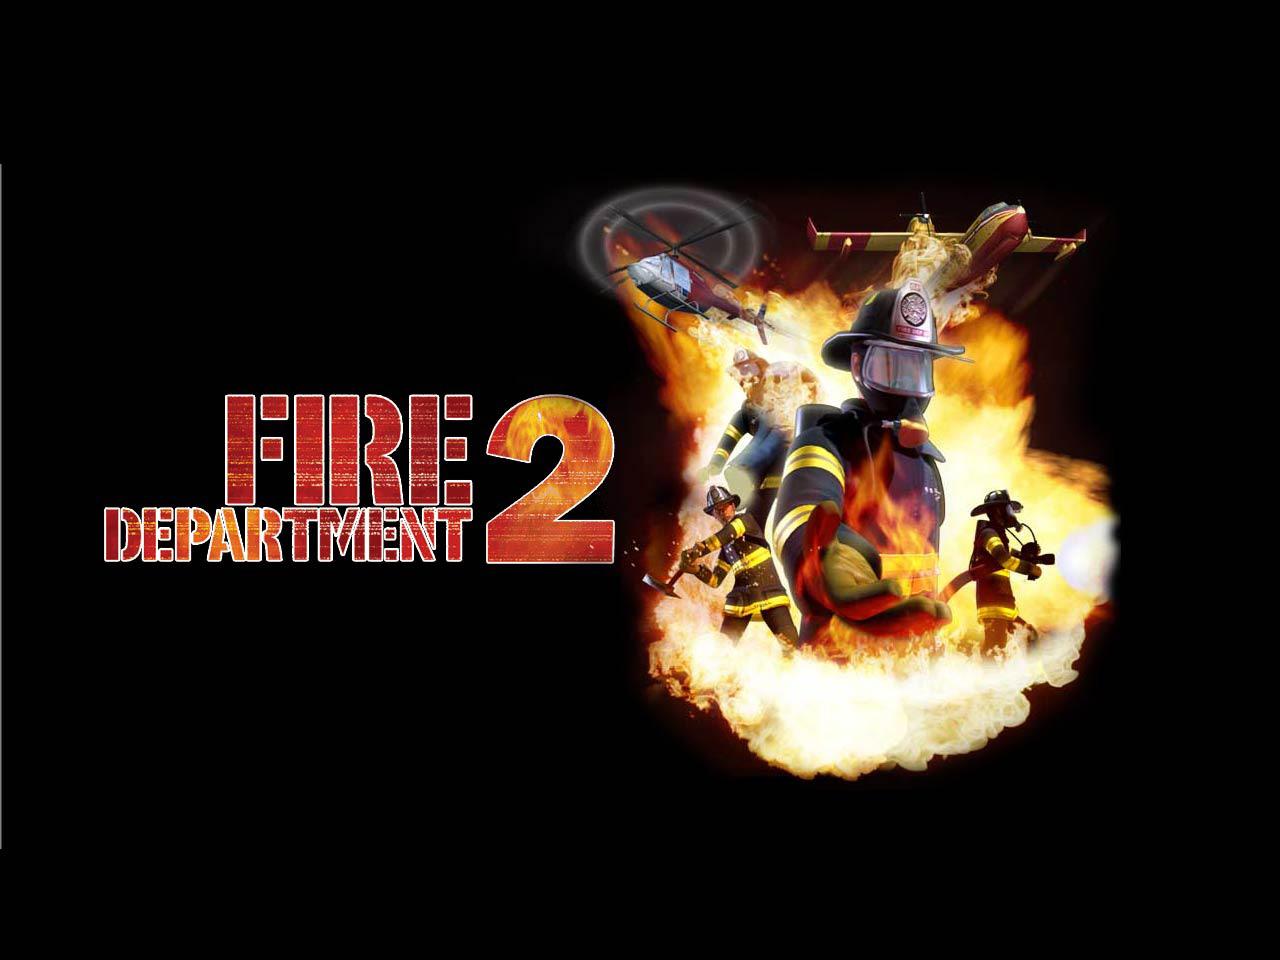 Firefighter Wallpaper For The Game